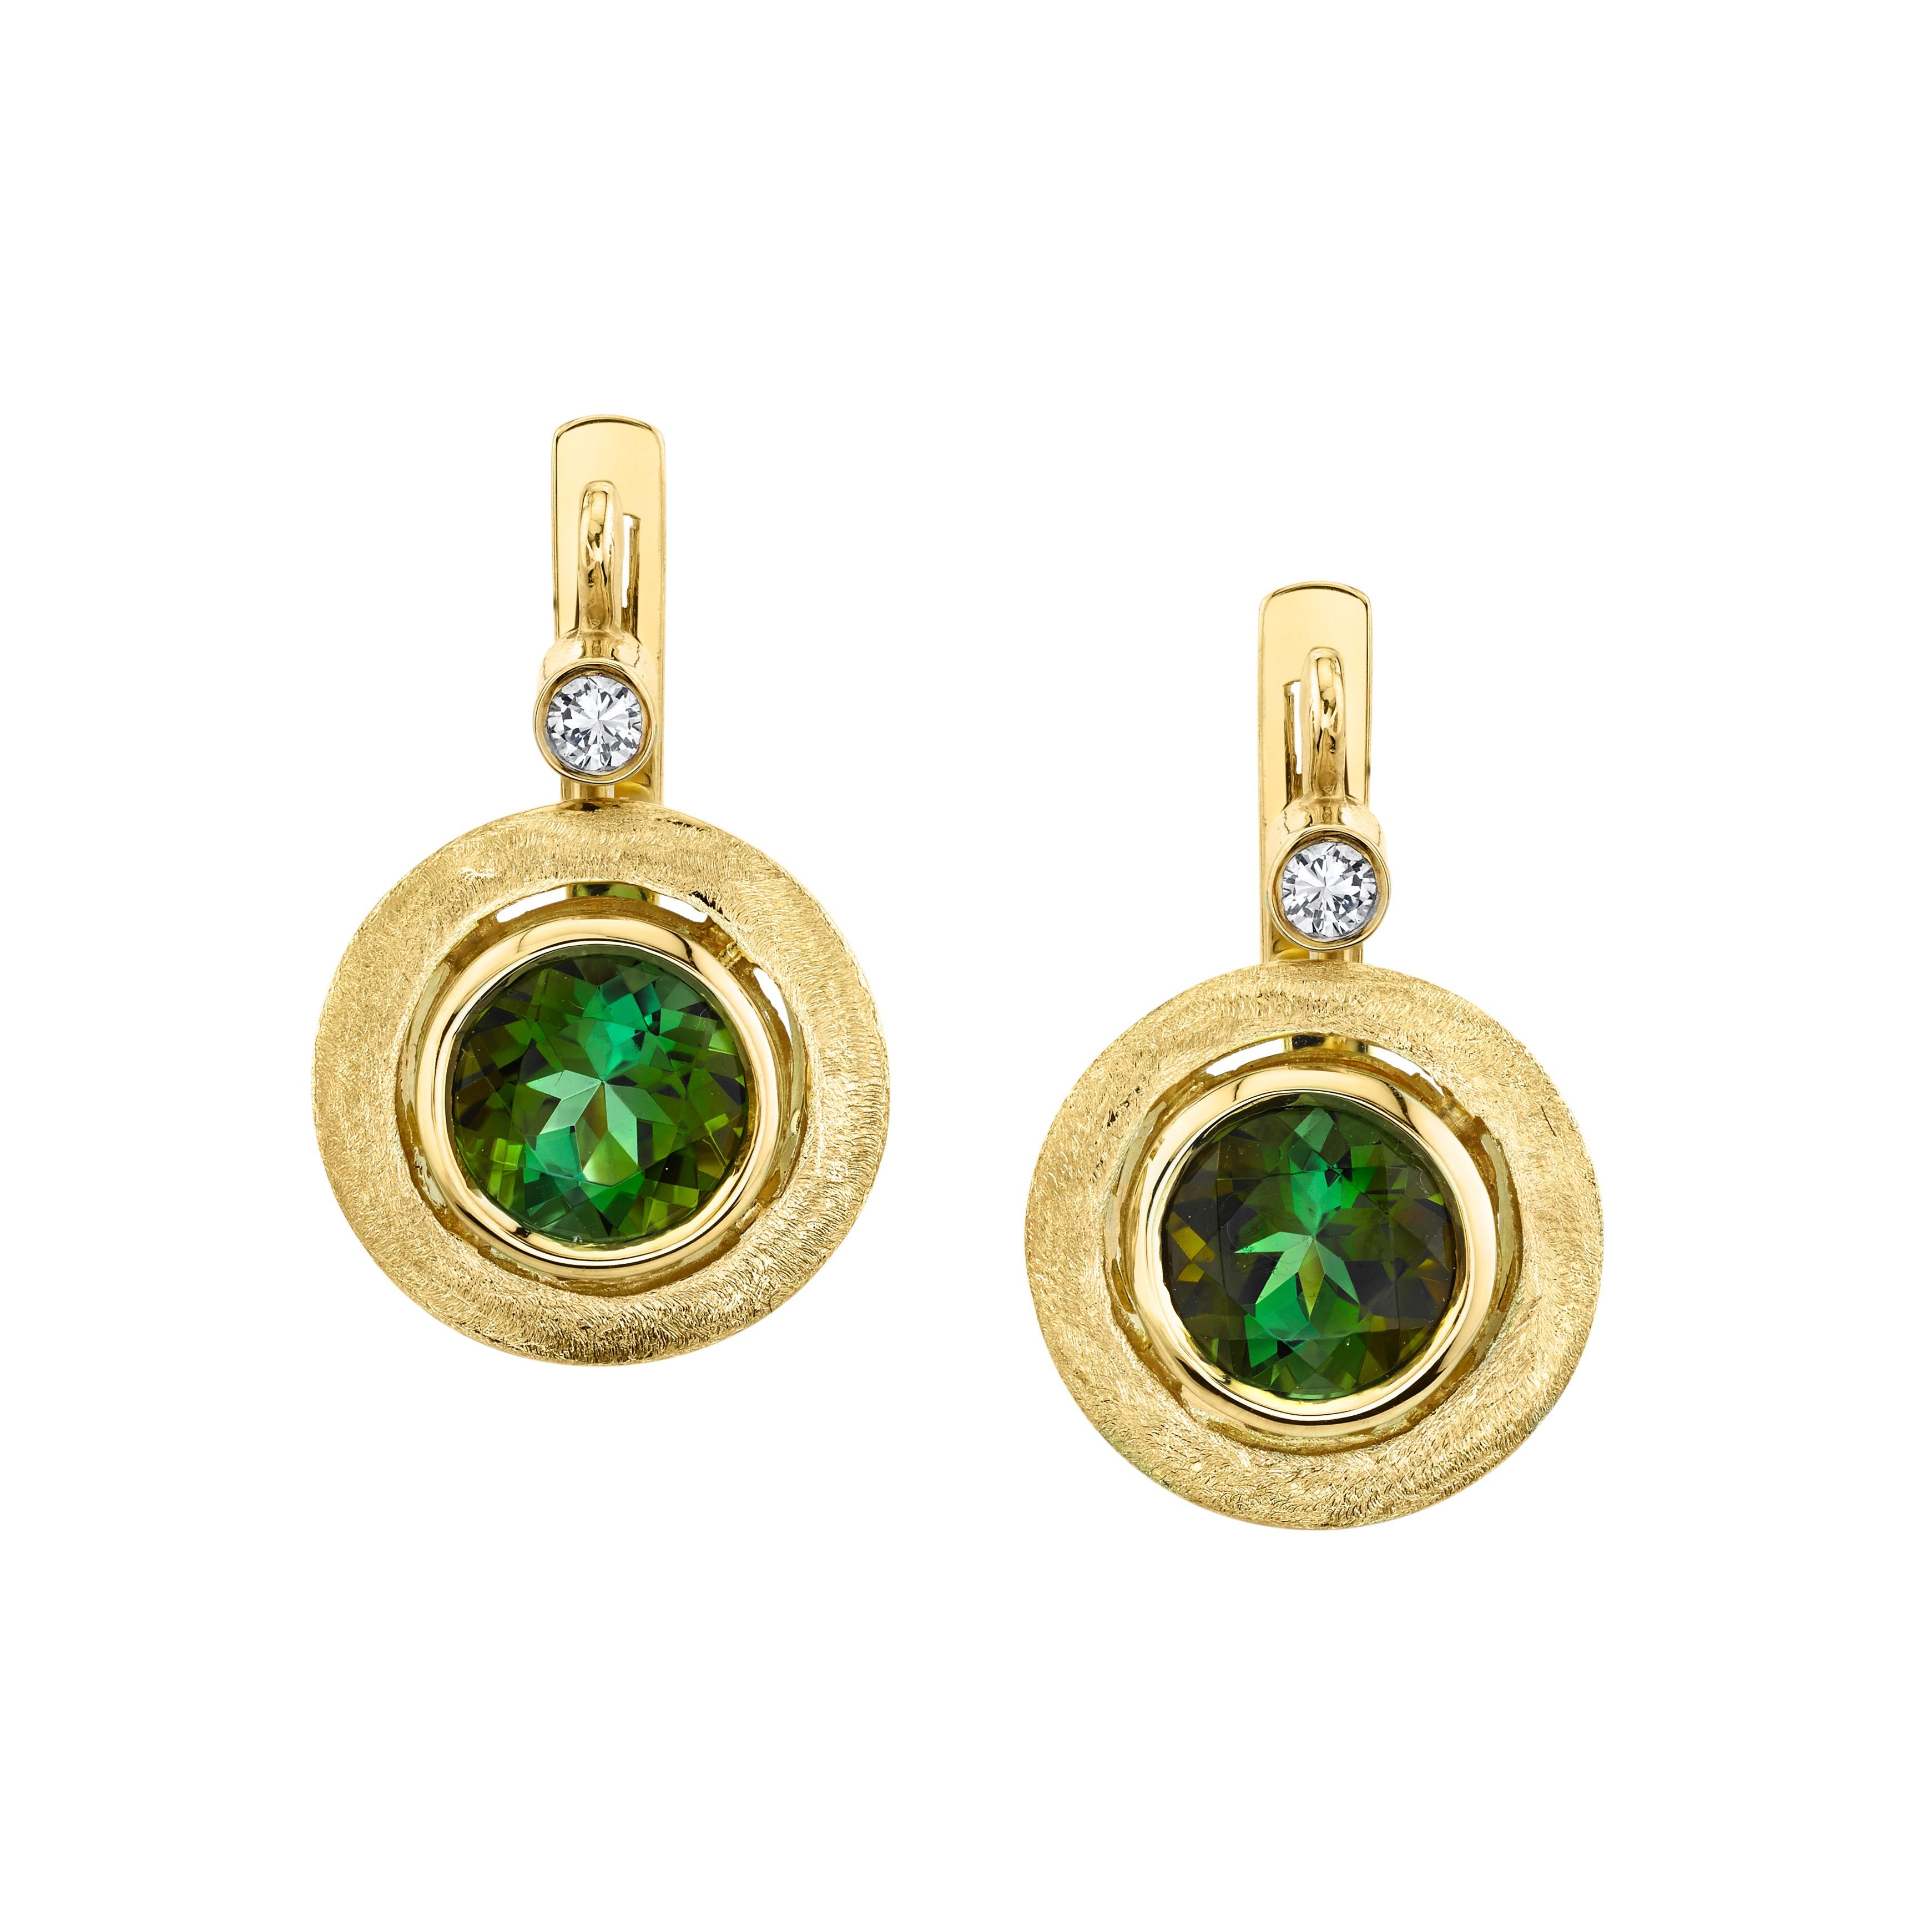 3.55 Carat Total Green Tourmaline and Diamond Drop Earrings in Yellow Gold For Sale